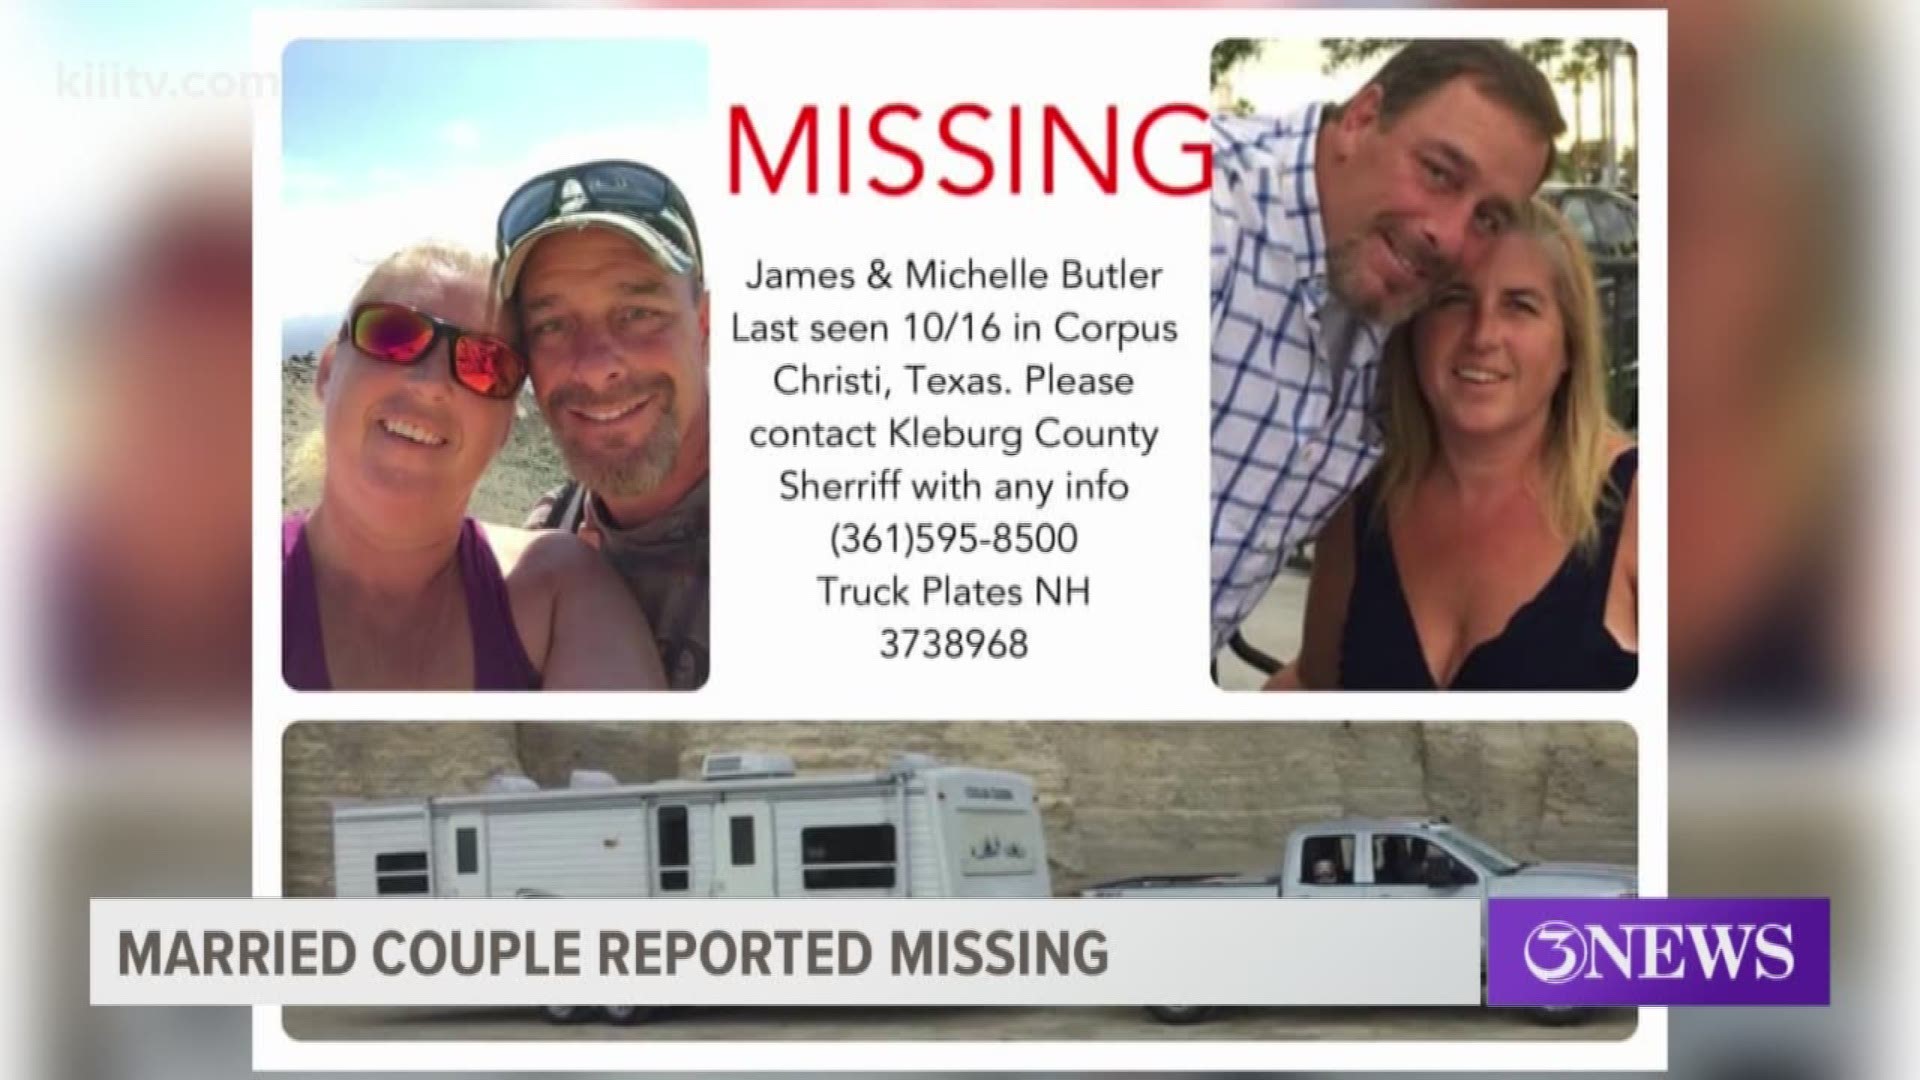 The Kleberg County Sheriff's Office reported the couple was last seen at the Padre Balli Park on October 14.